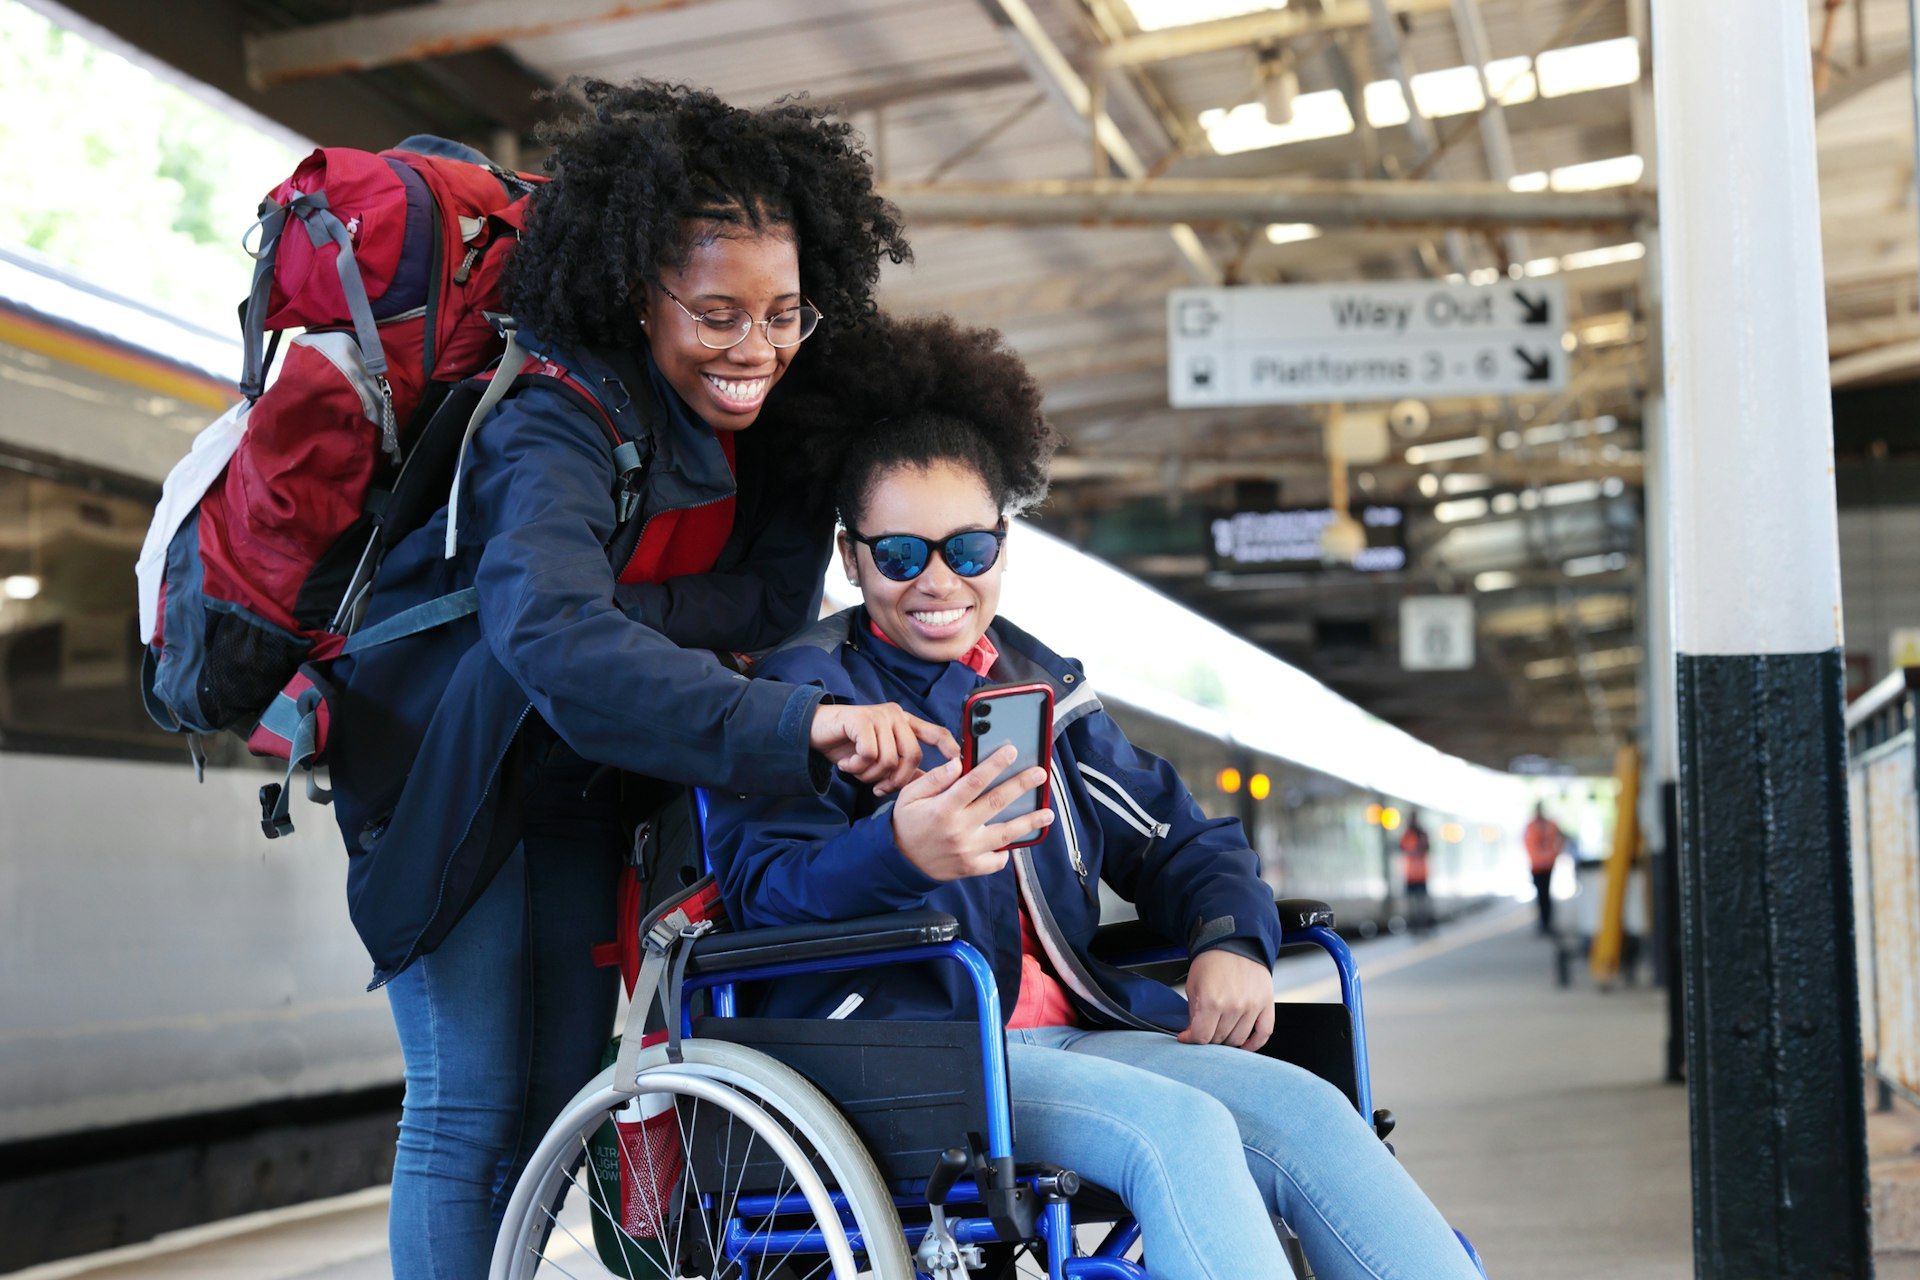 Two women, one in a wheelchair and one standing, look at a smartphone on a train platform